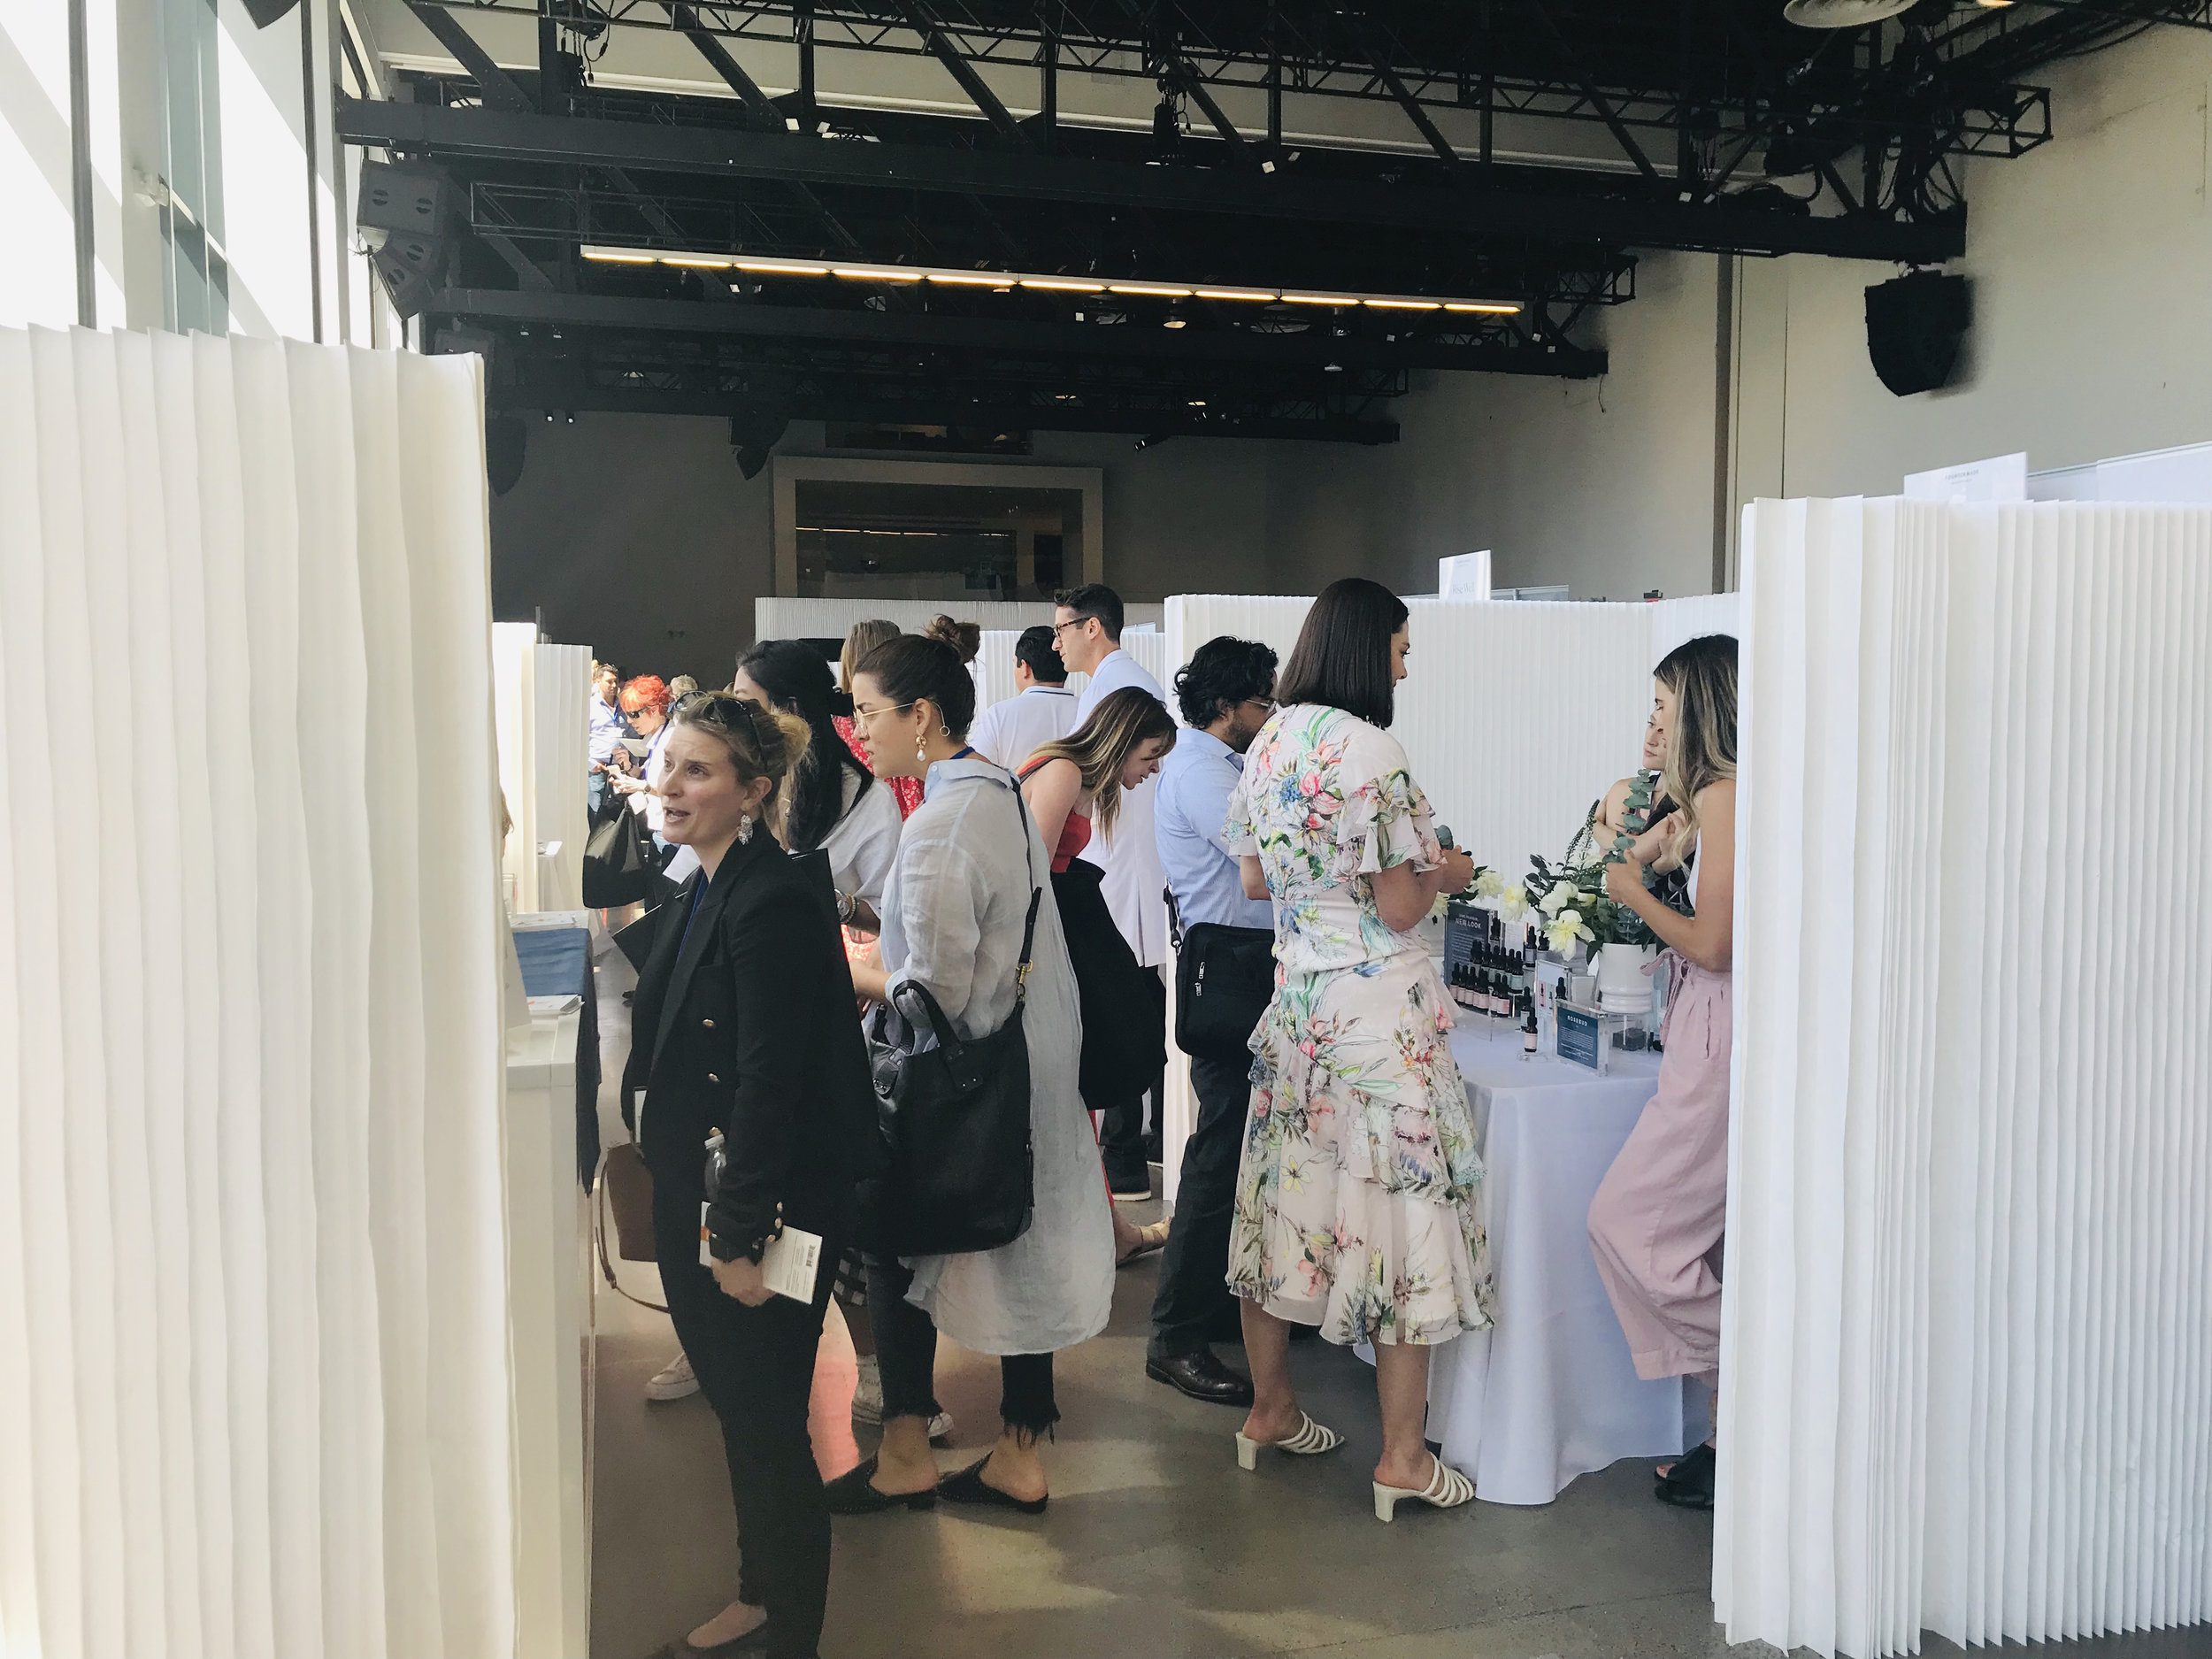 Consumer Goods Pioneers Came Together at CDS 2019